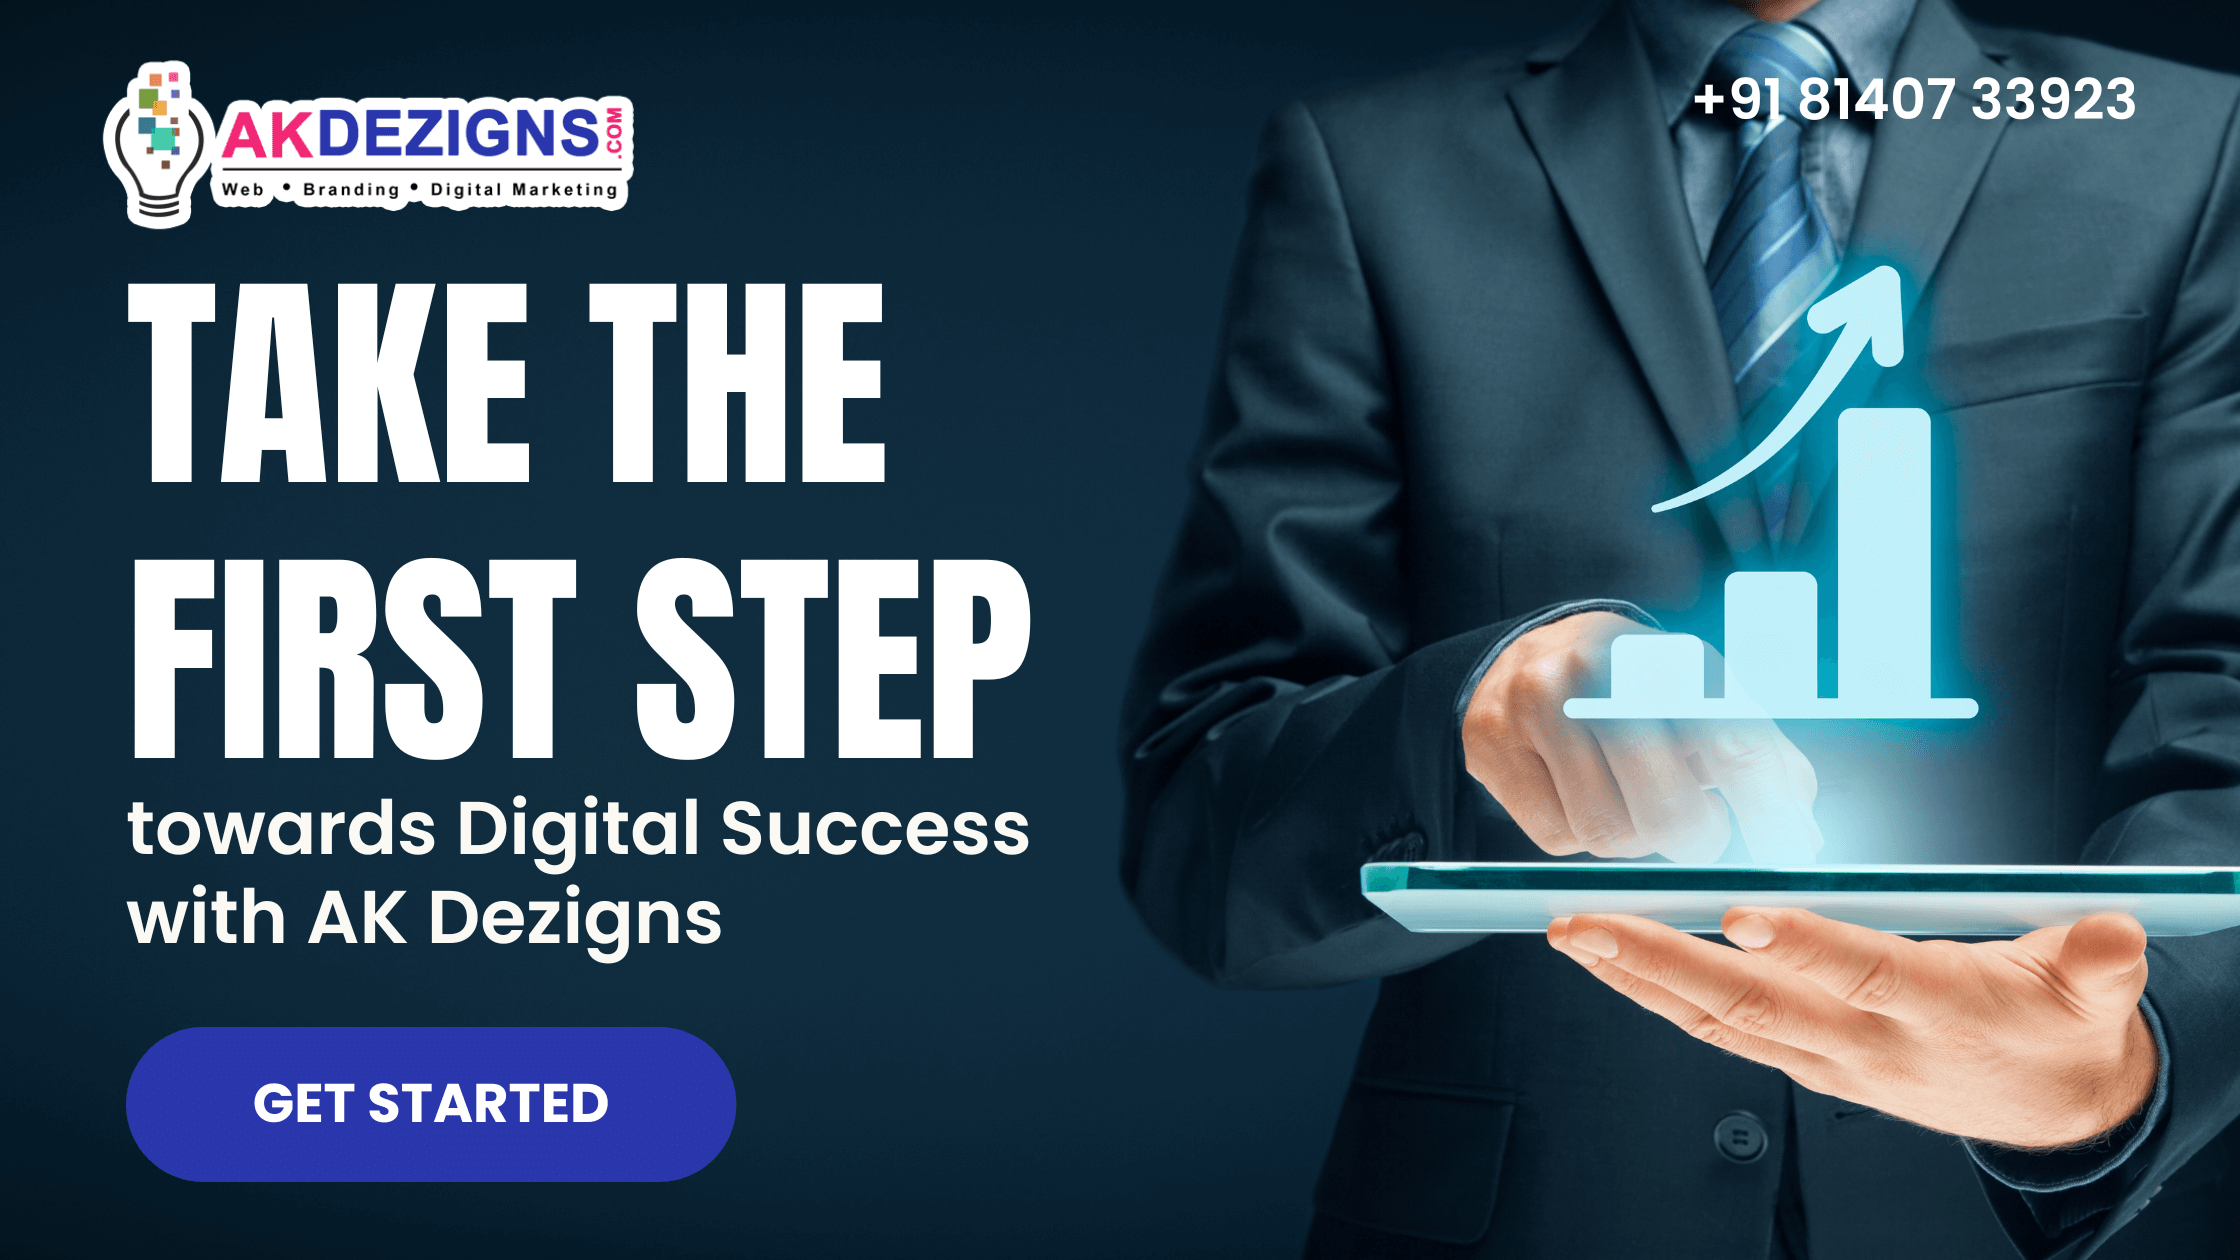 Take the First Step towards Digital Success with AK Dezigns